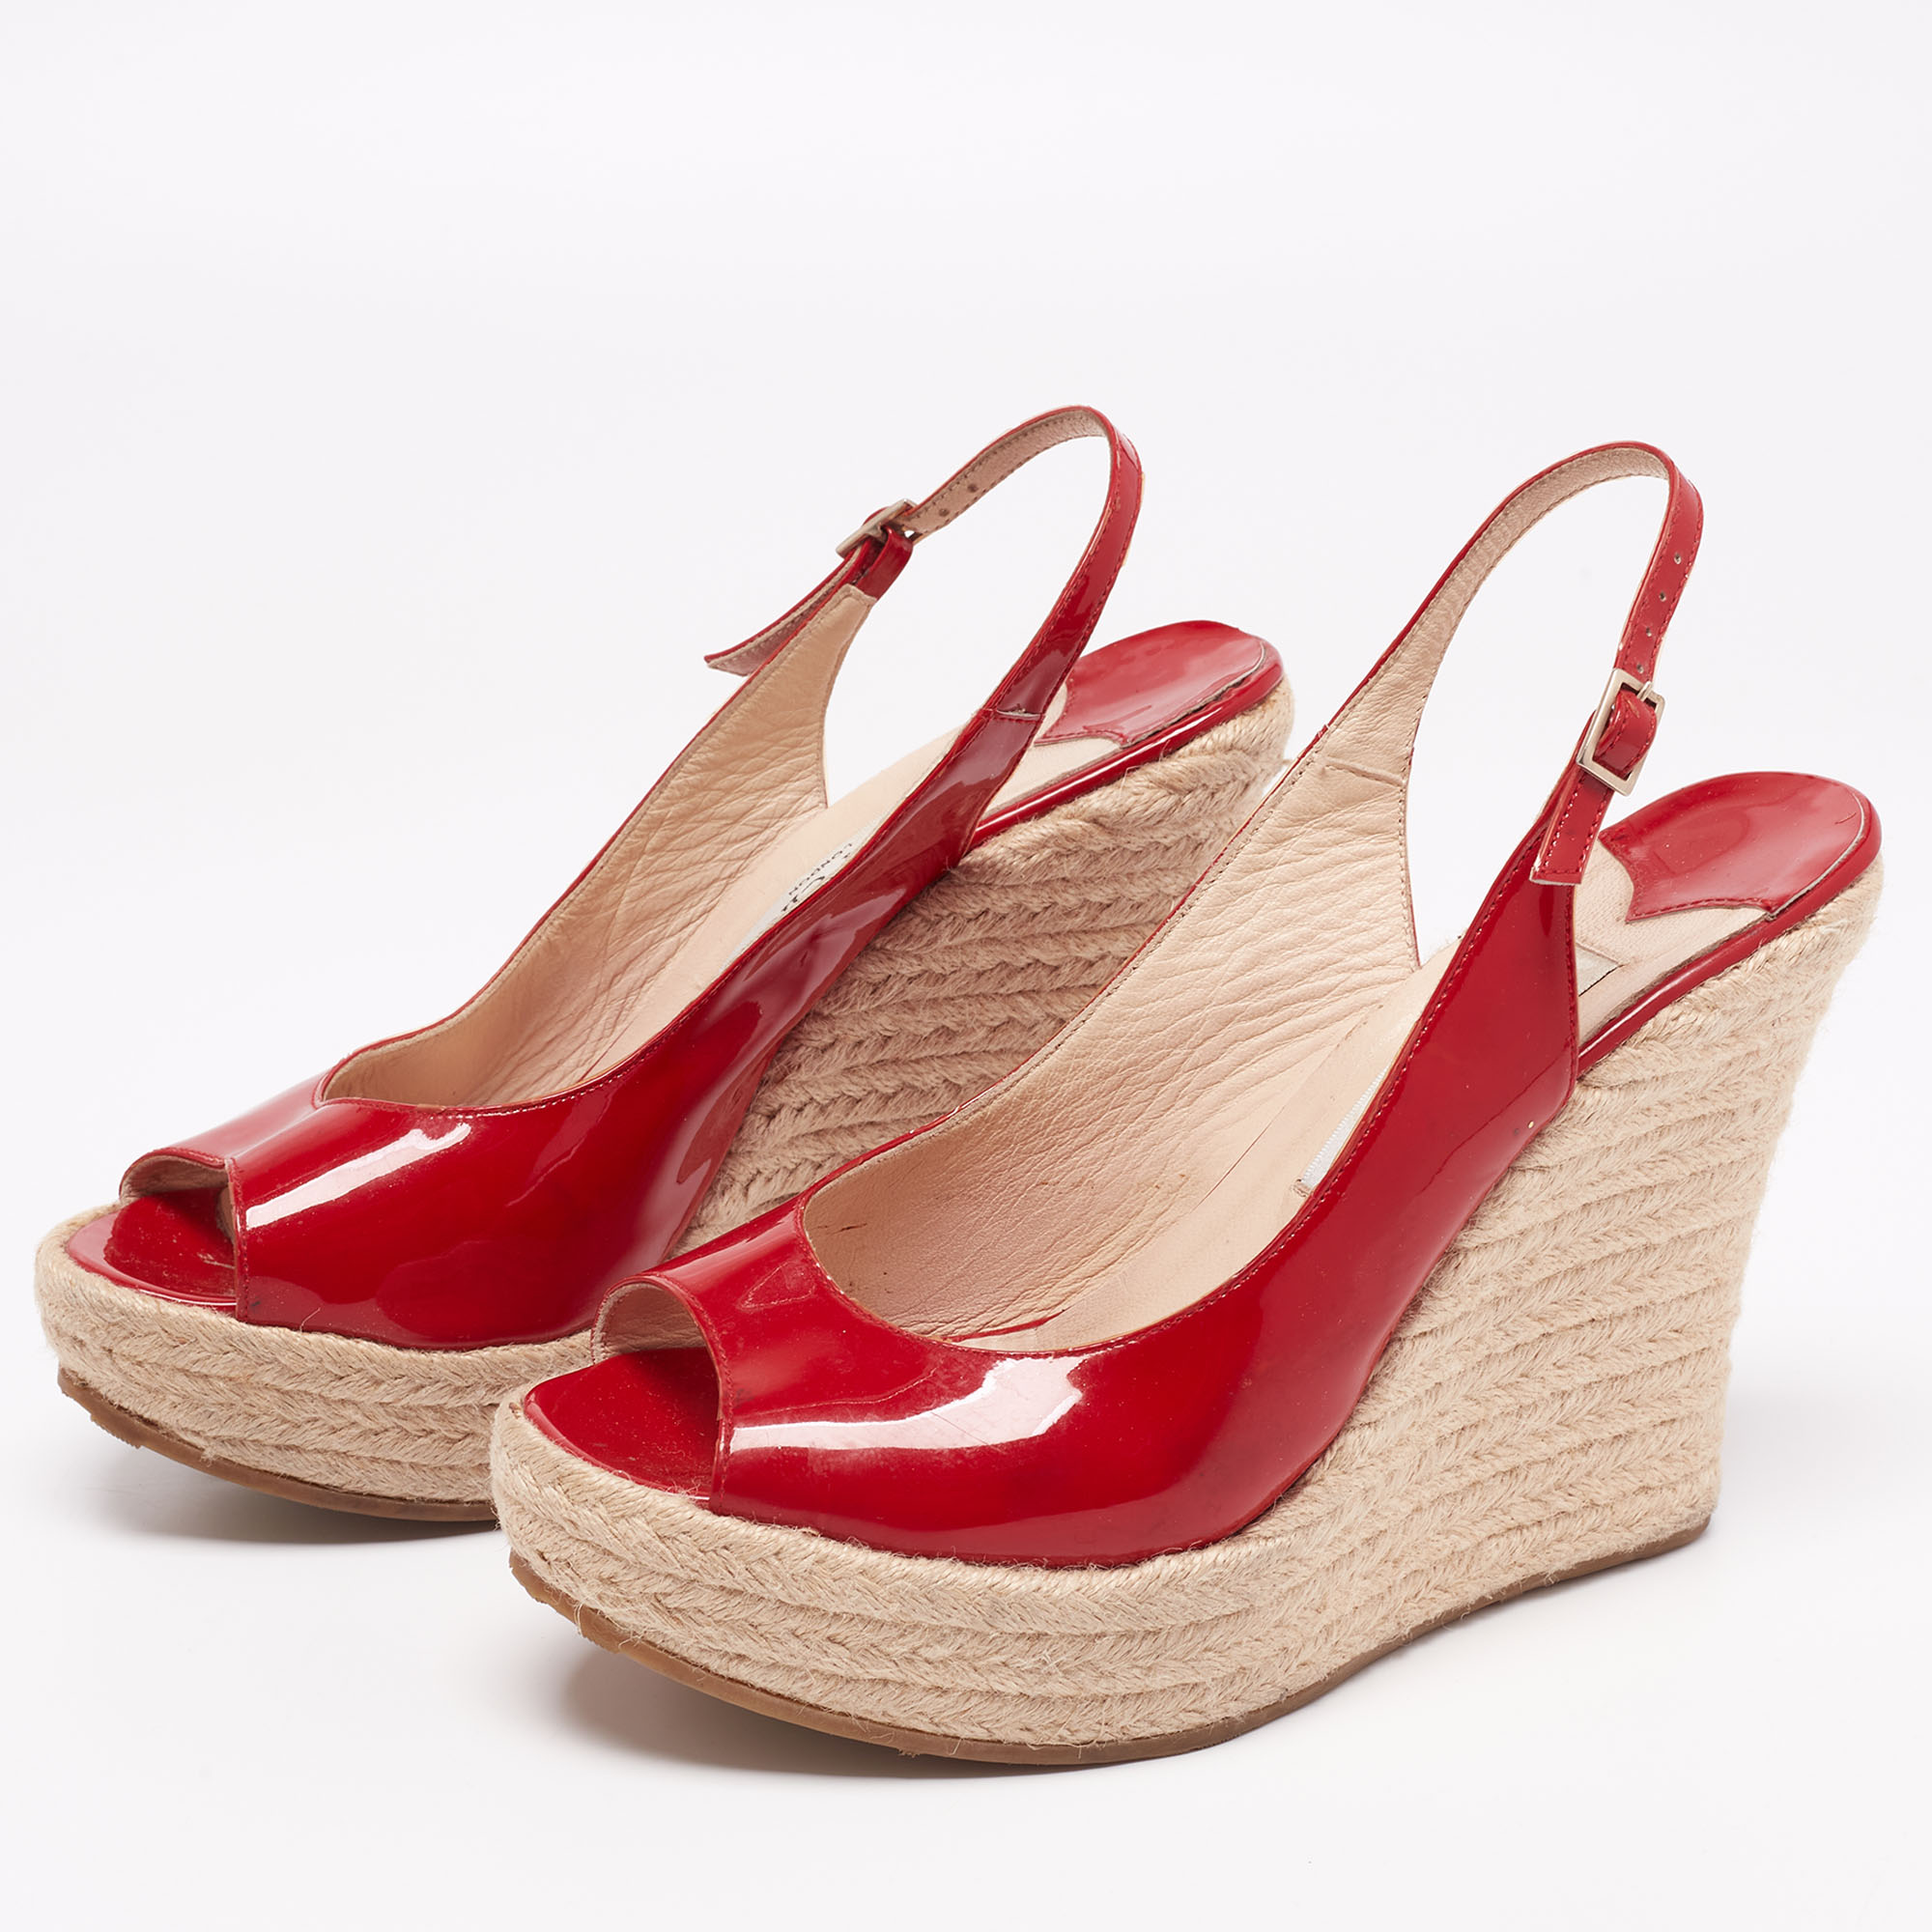 

Jimmy Choo Red Patent Leather Espadrille Wedge Slingback Sandals Size